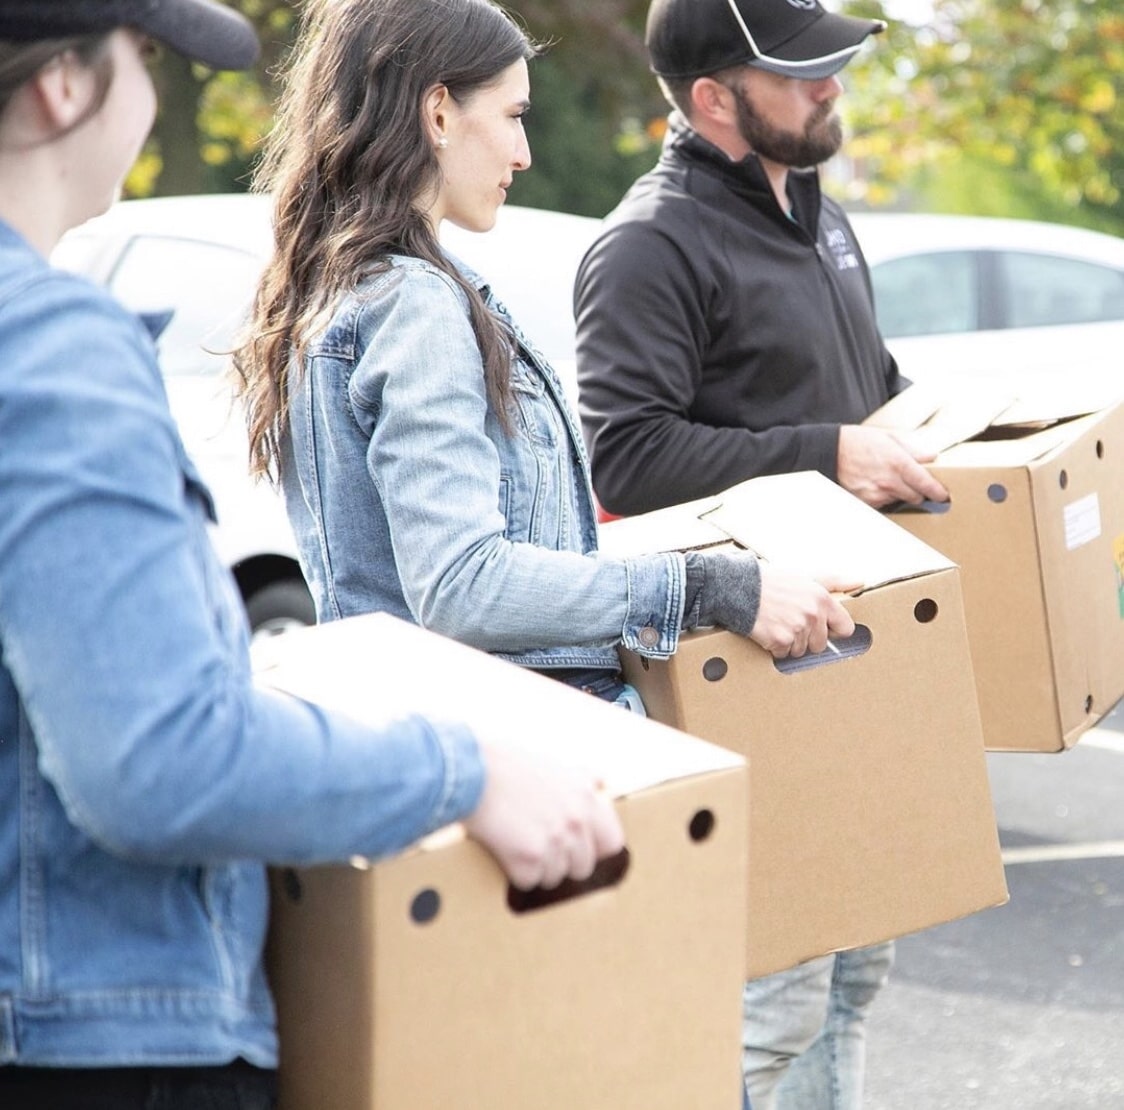 Volunteers carrying boxes.